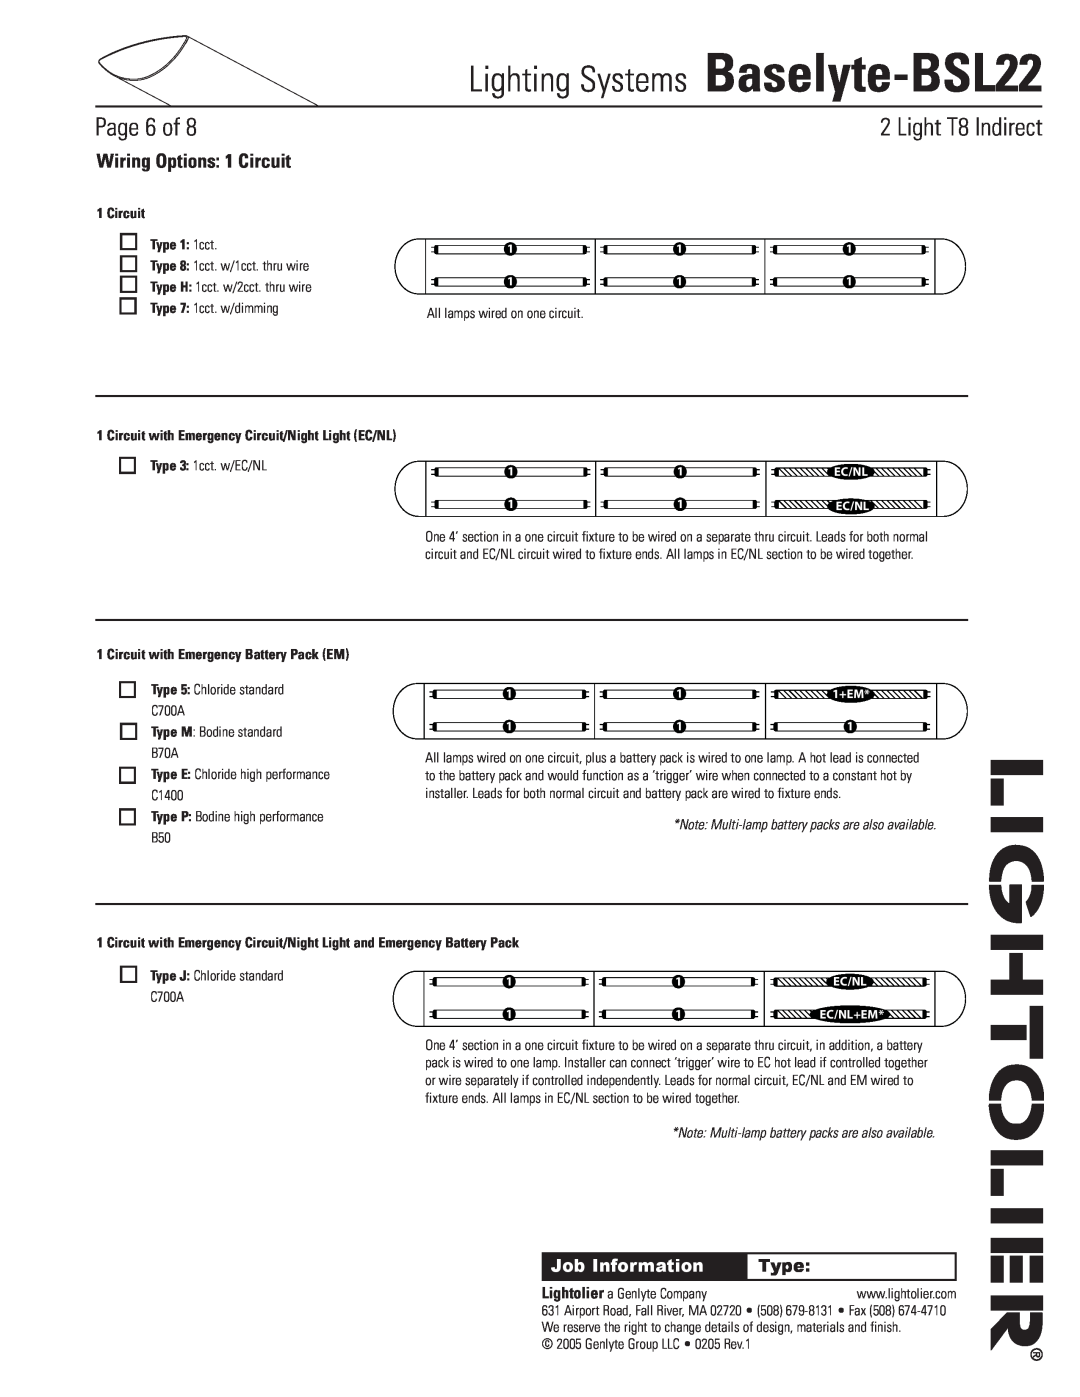 Lightolier Baselyte-BSL22 Wiring Options 1 Circuit, Circuit Type 1 1cct, Circuit with Emergency Battery Pack EM, Page of 